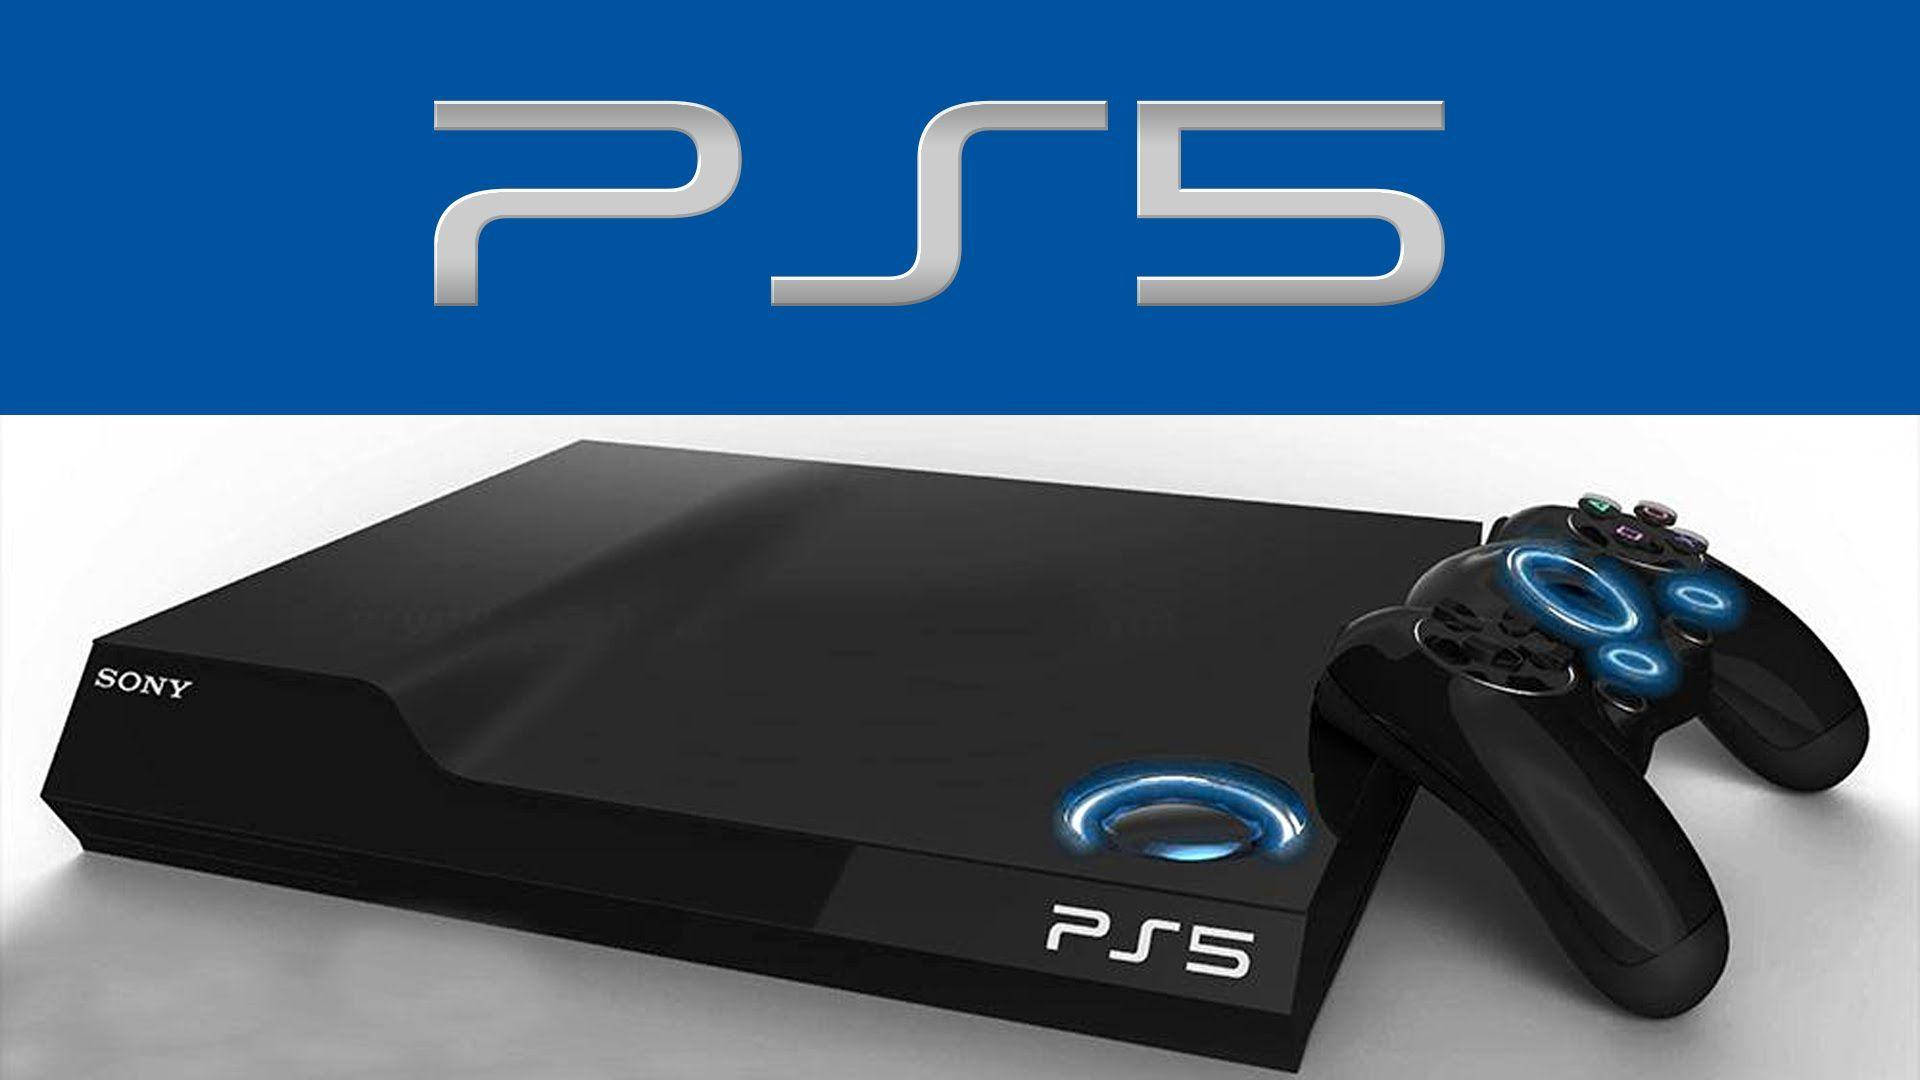 Ps5 Home Video Game Console